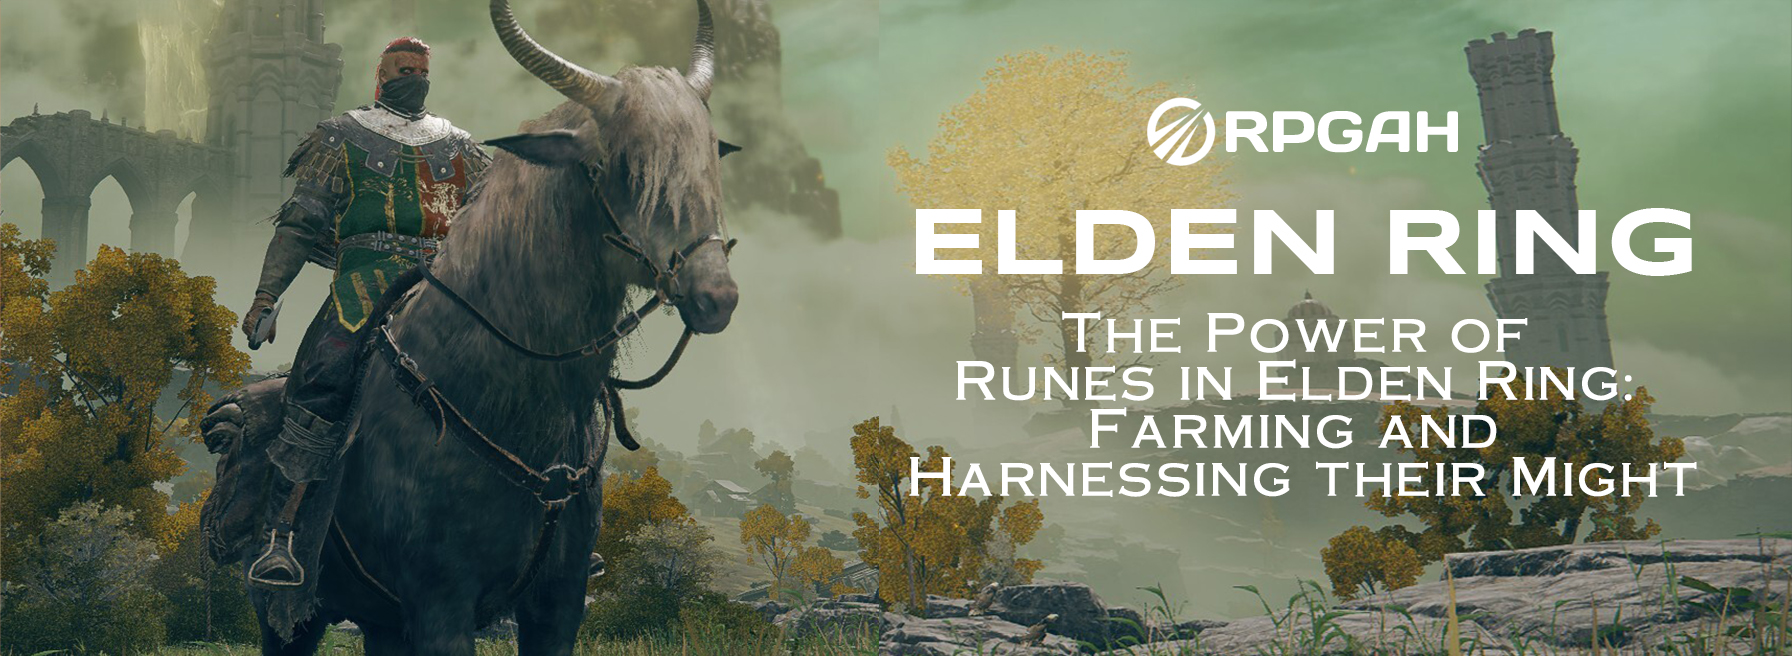 The Power of Runes in Elden Ring: Farming and Harnessing their Might 